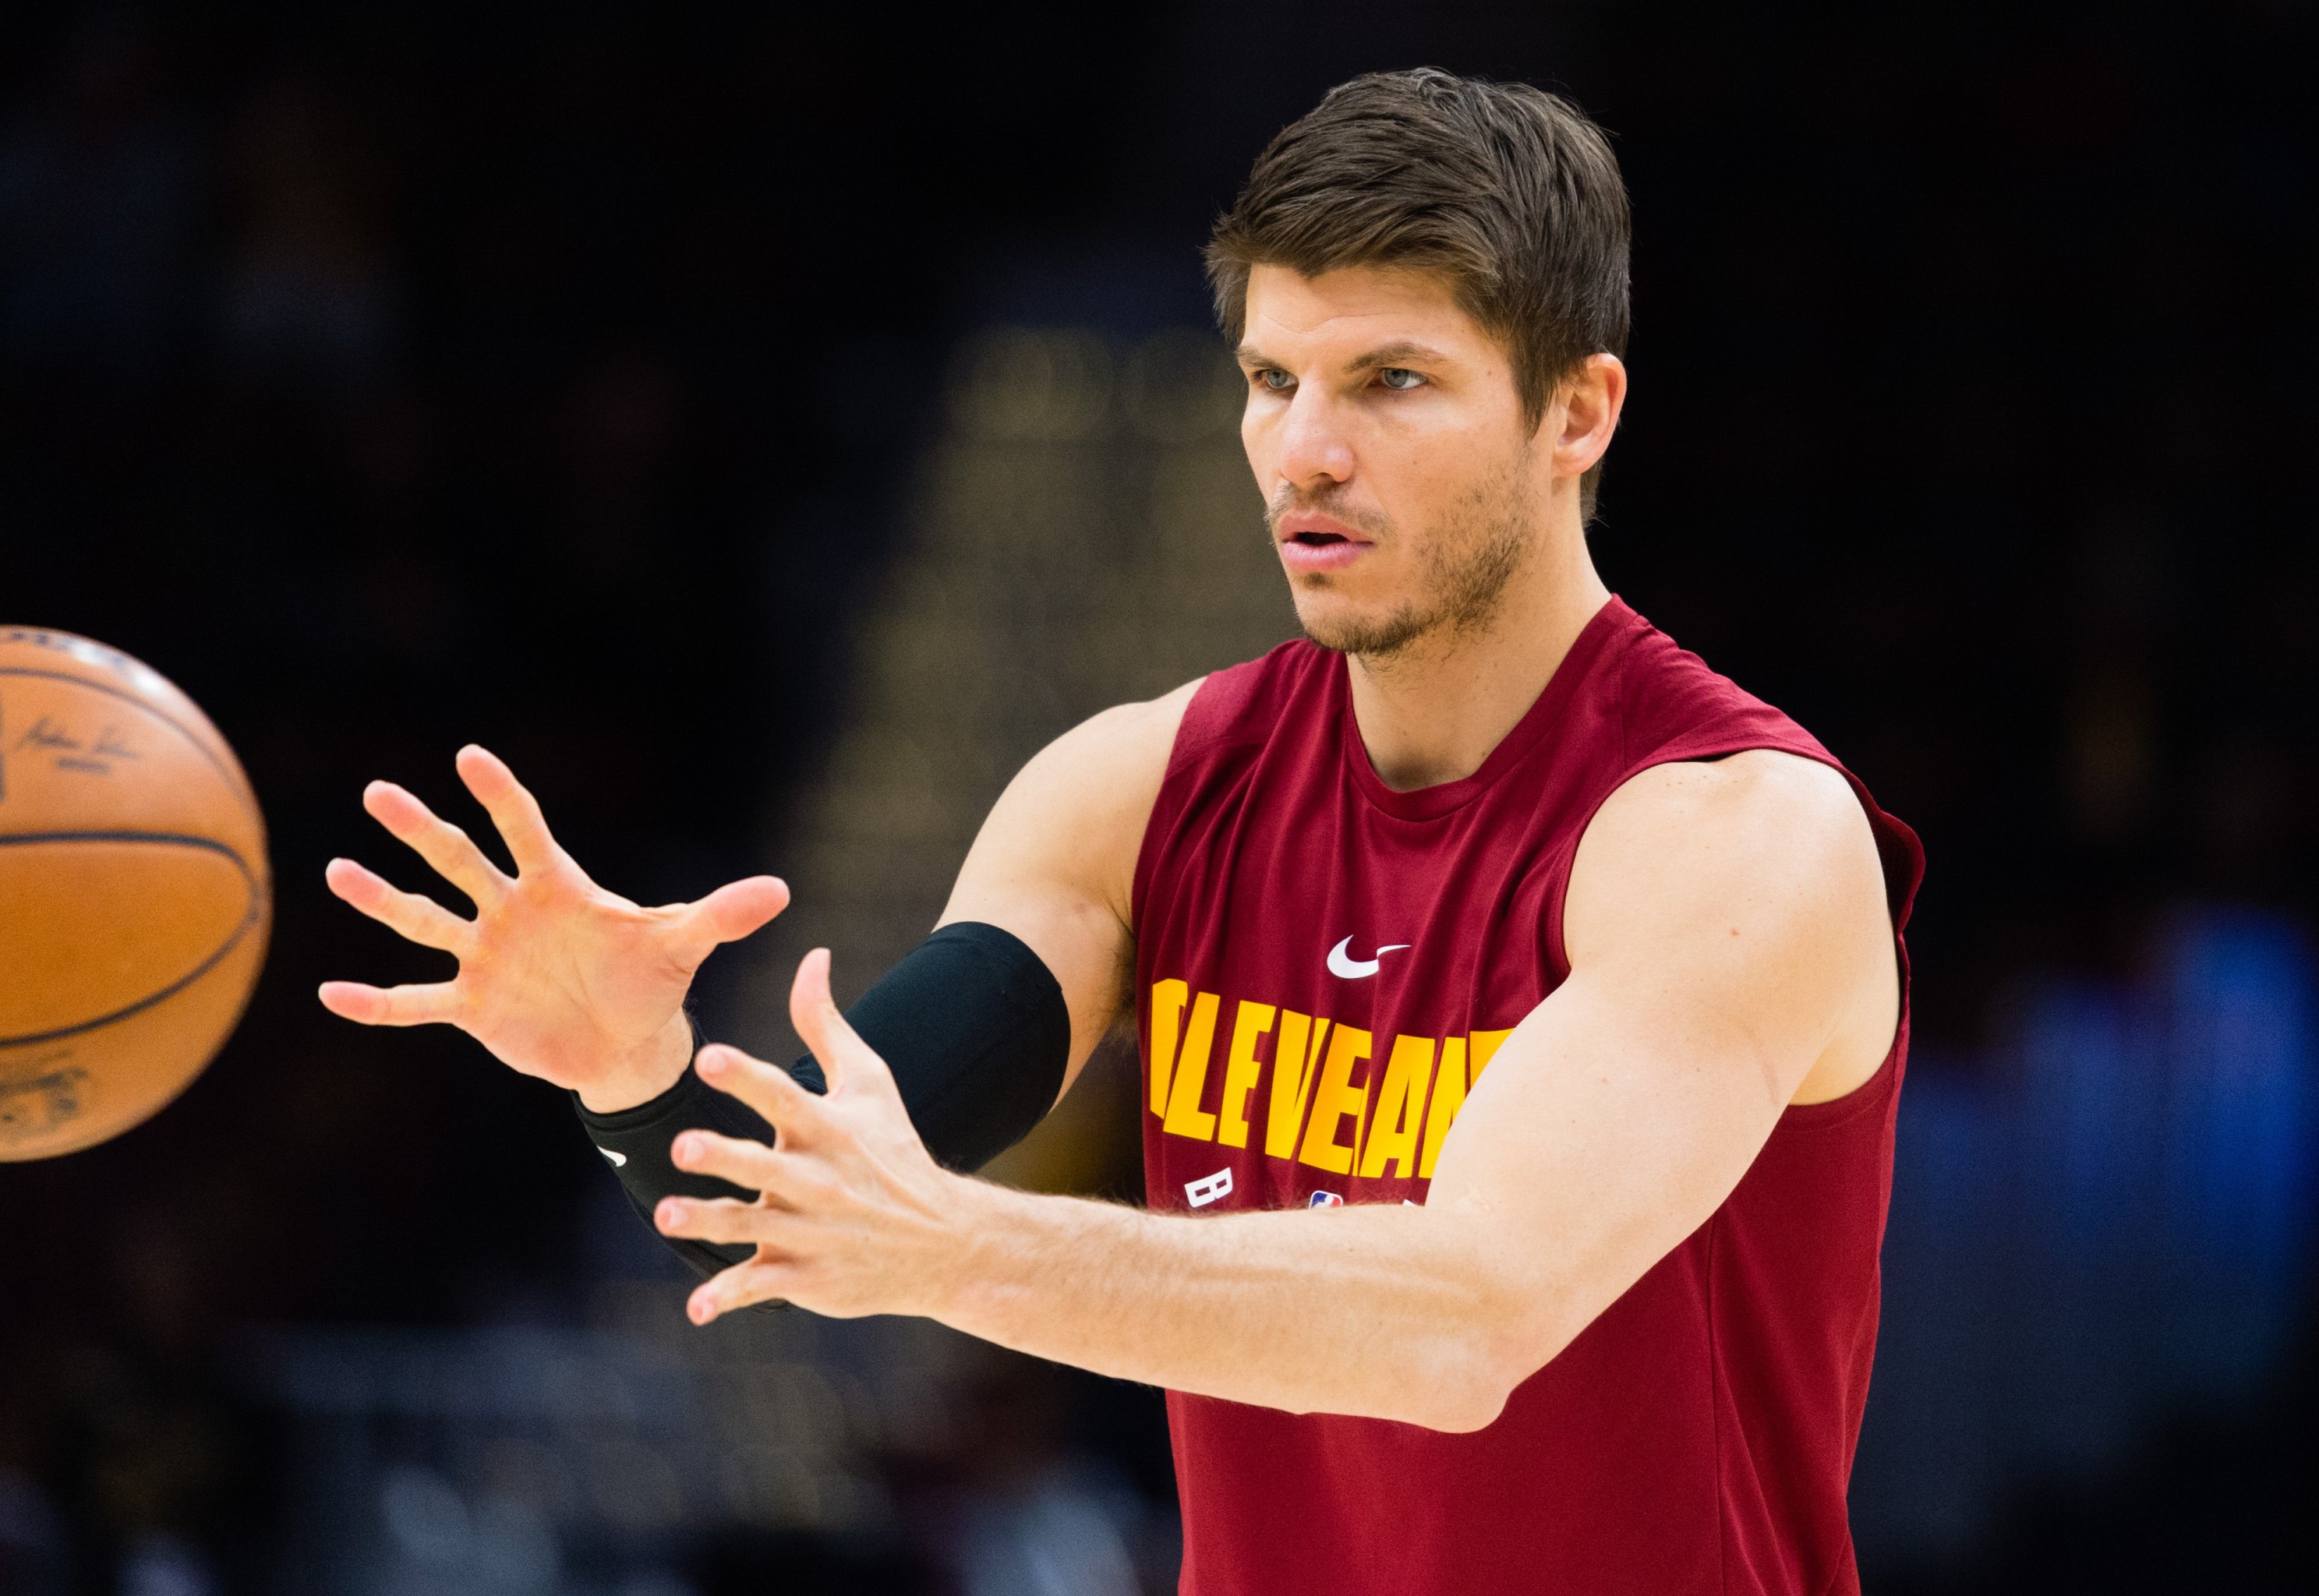 For the Love of the Game: Mind, Body and Spirit with Kyle Korver